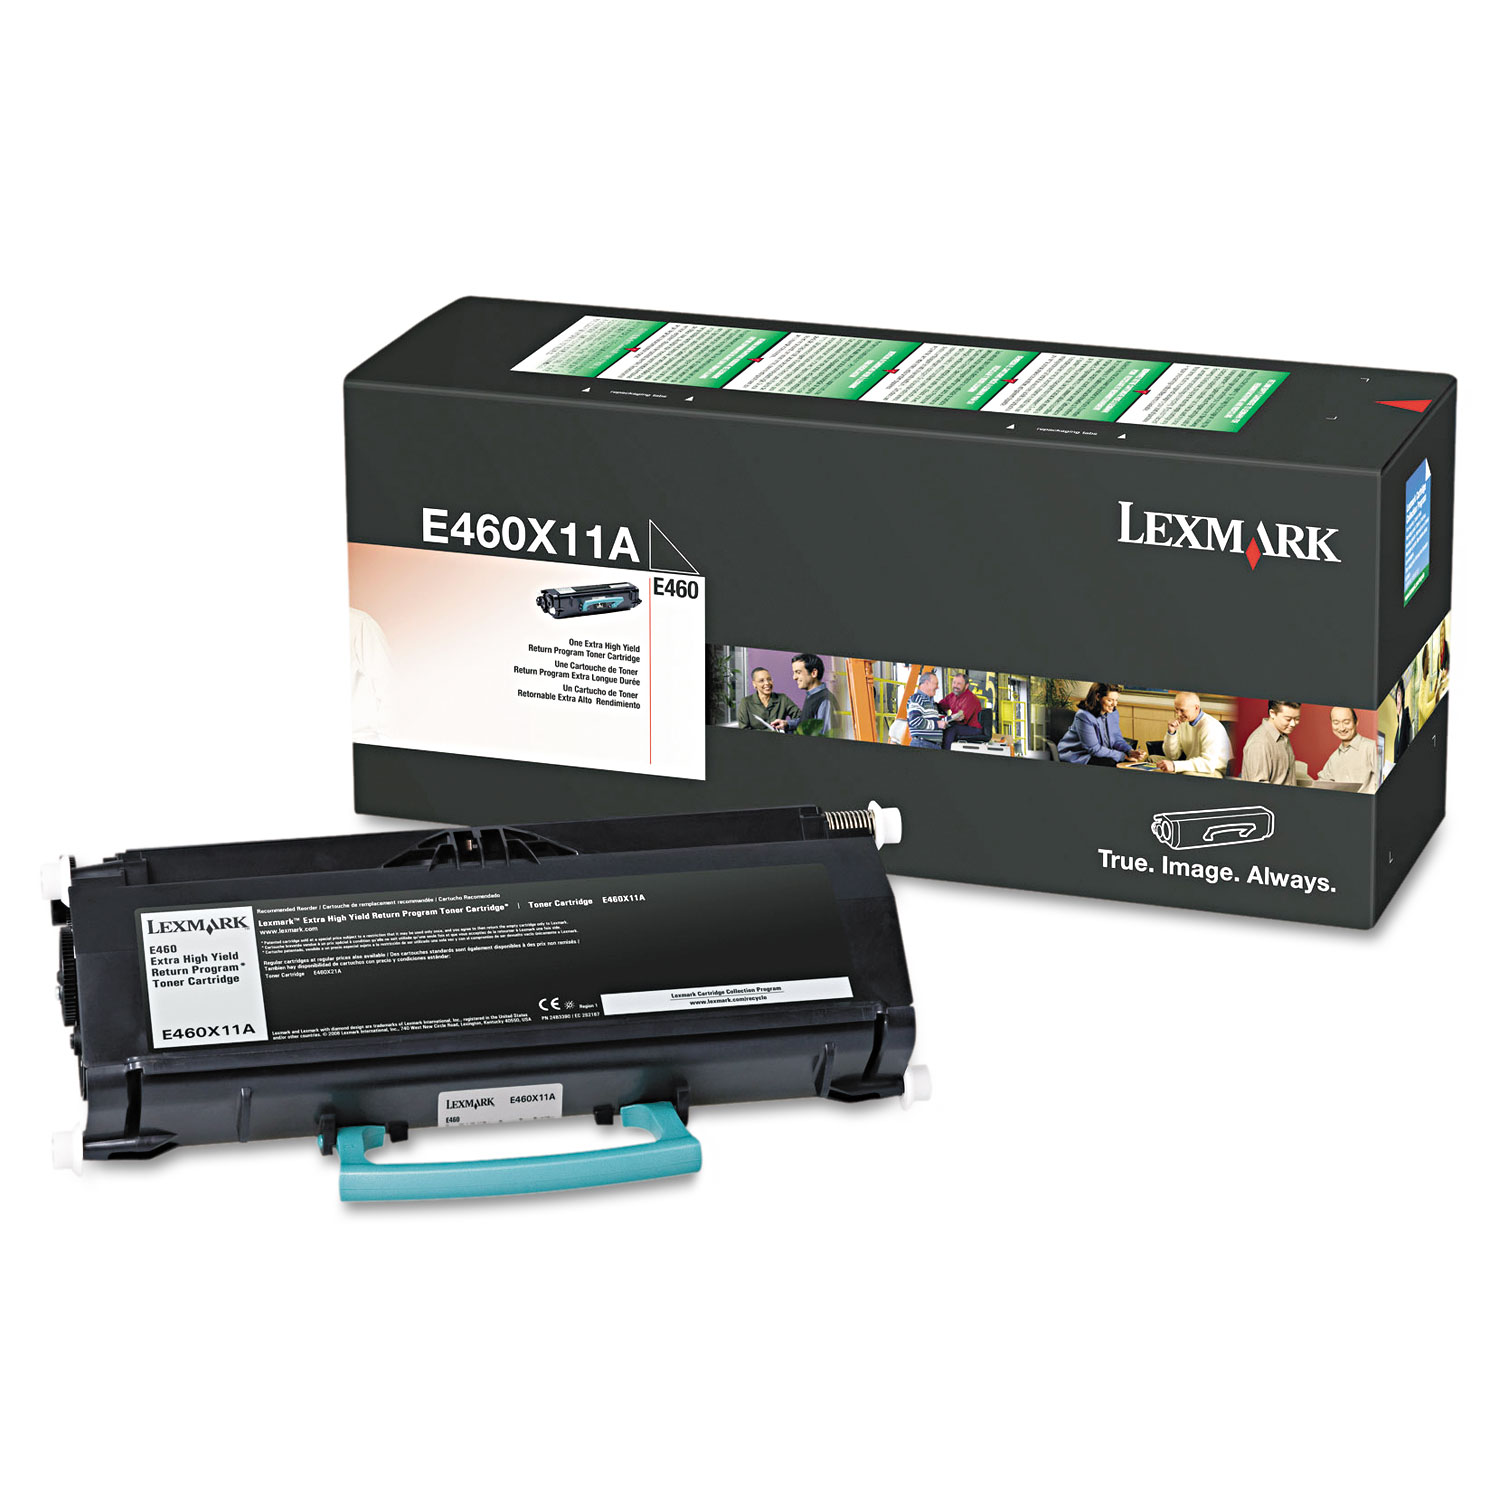 E460X11A Extra High-Yield Toner, 15000 Page-Yield, Black